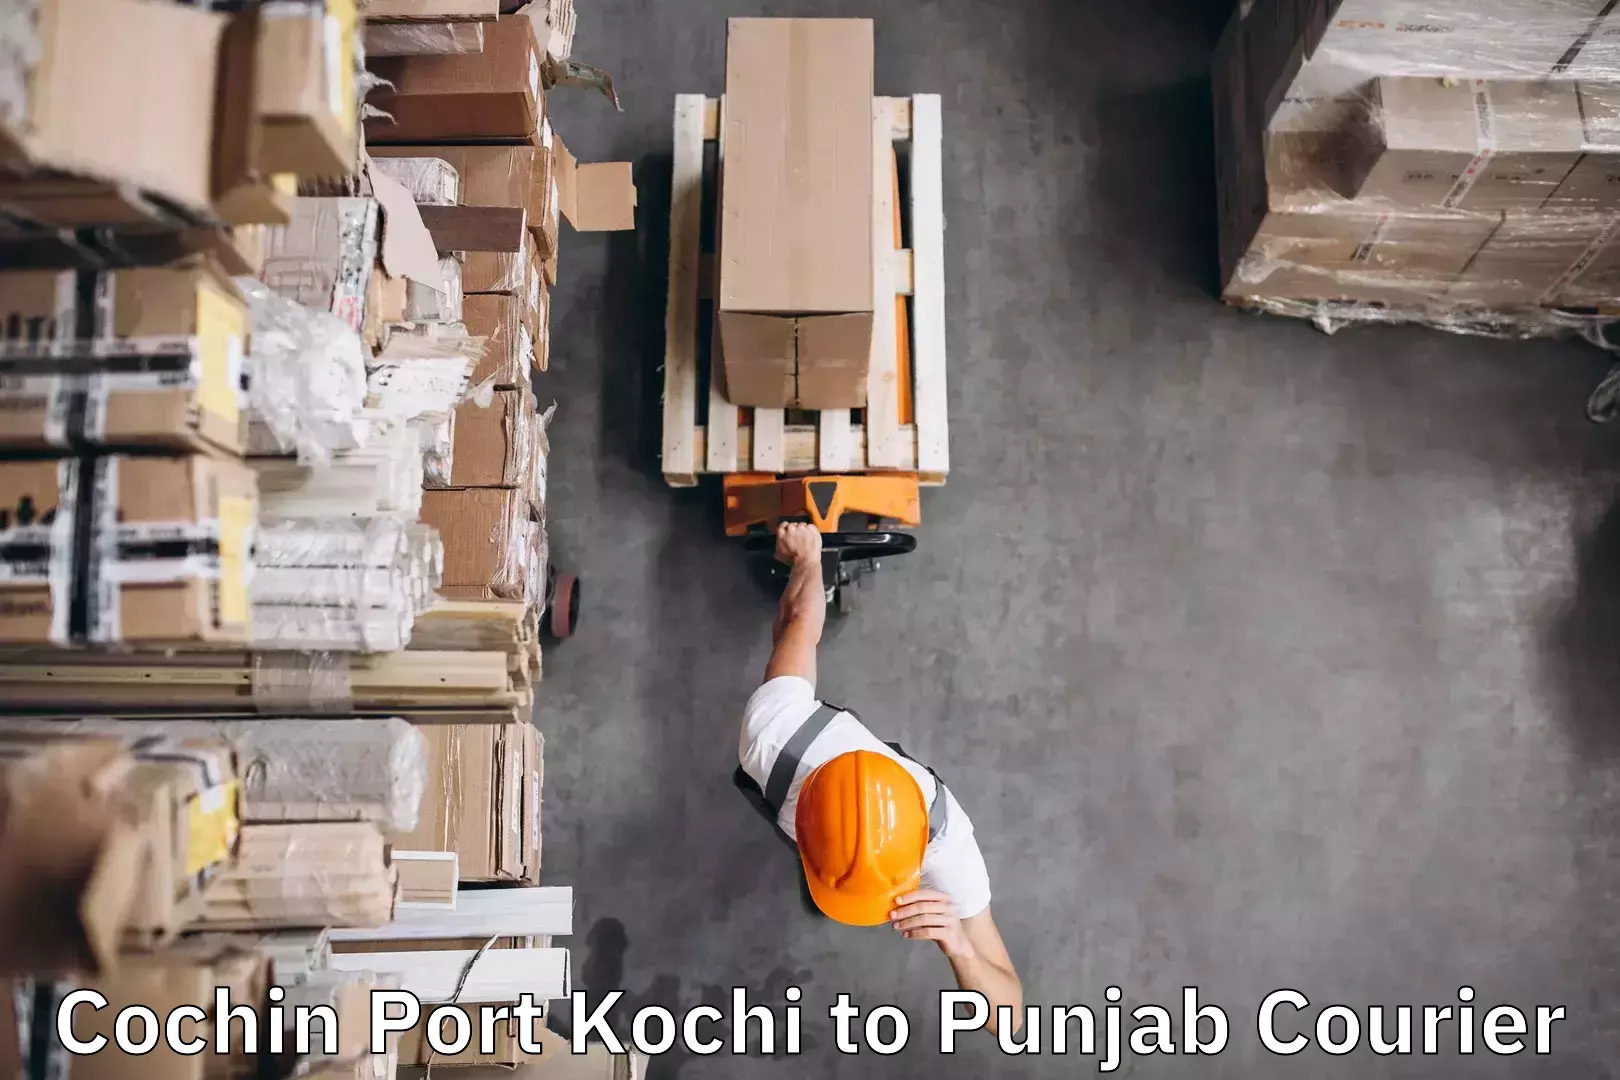 Baggage delivery management Cochin Port Kochi to Punjab